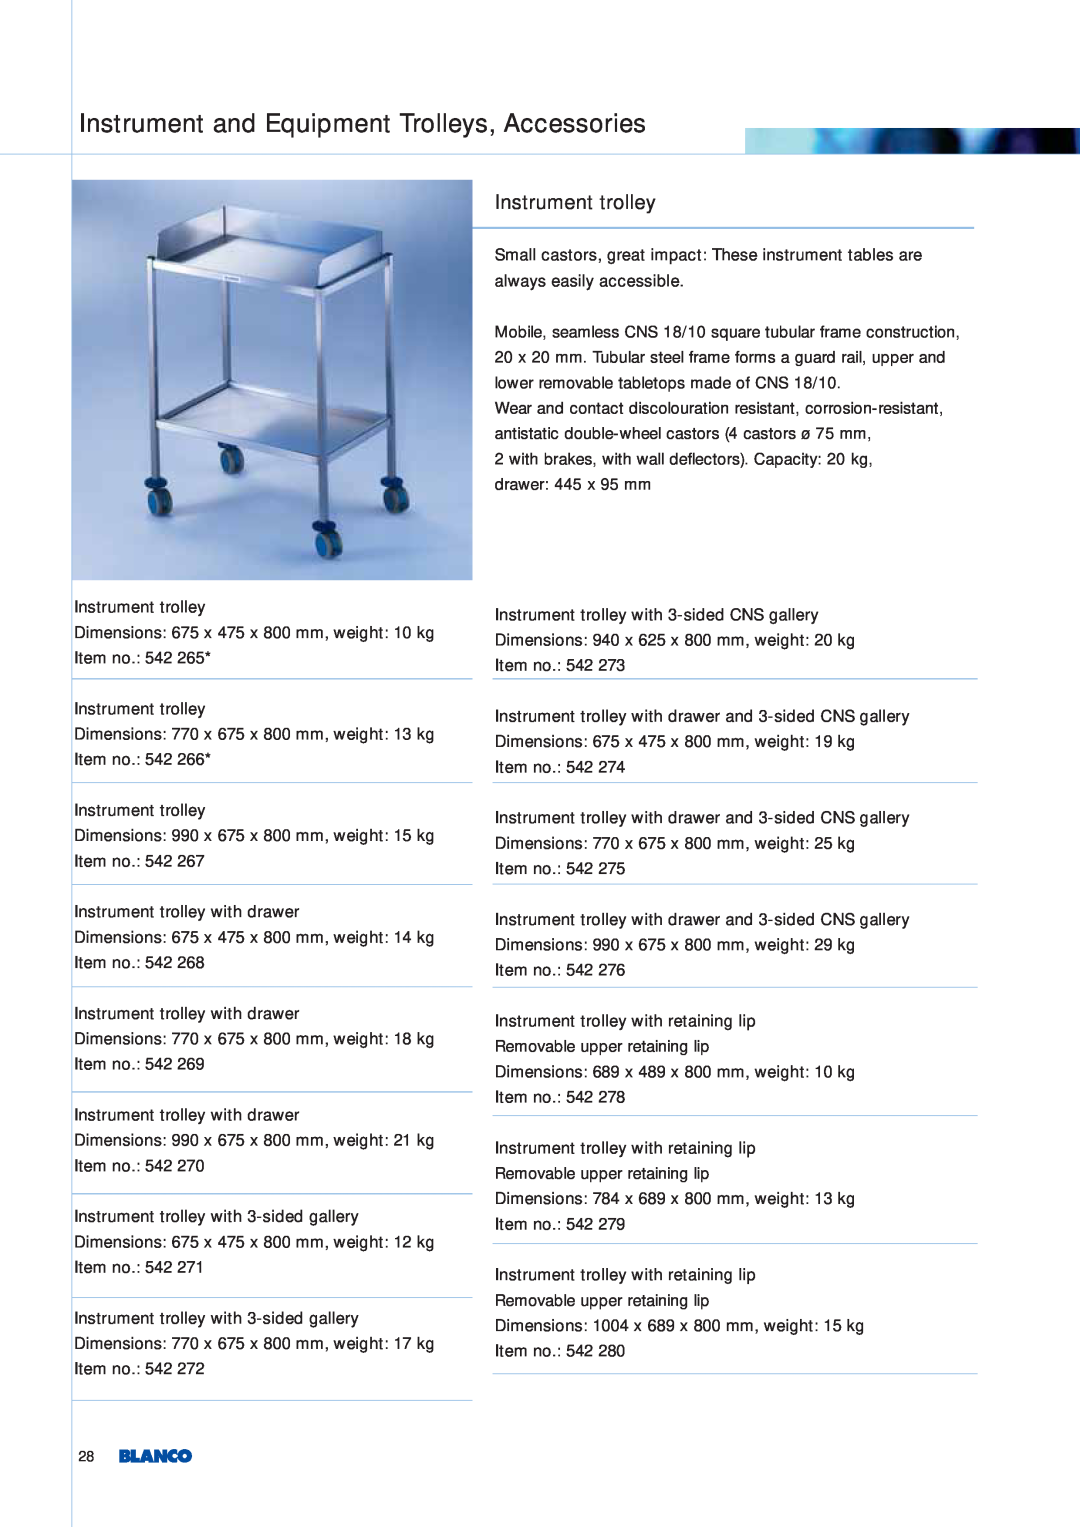 Blanco Tbingen manual Instrument and Equipment Trolleys, Accessories, Instrument trolley 